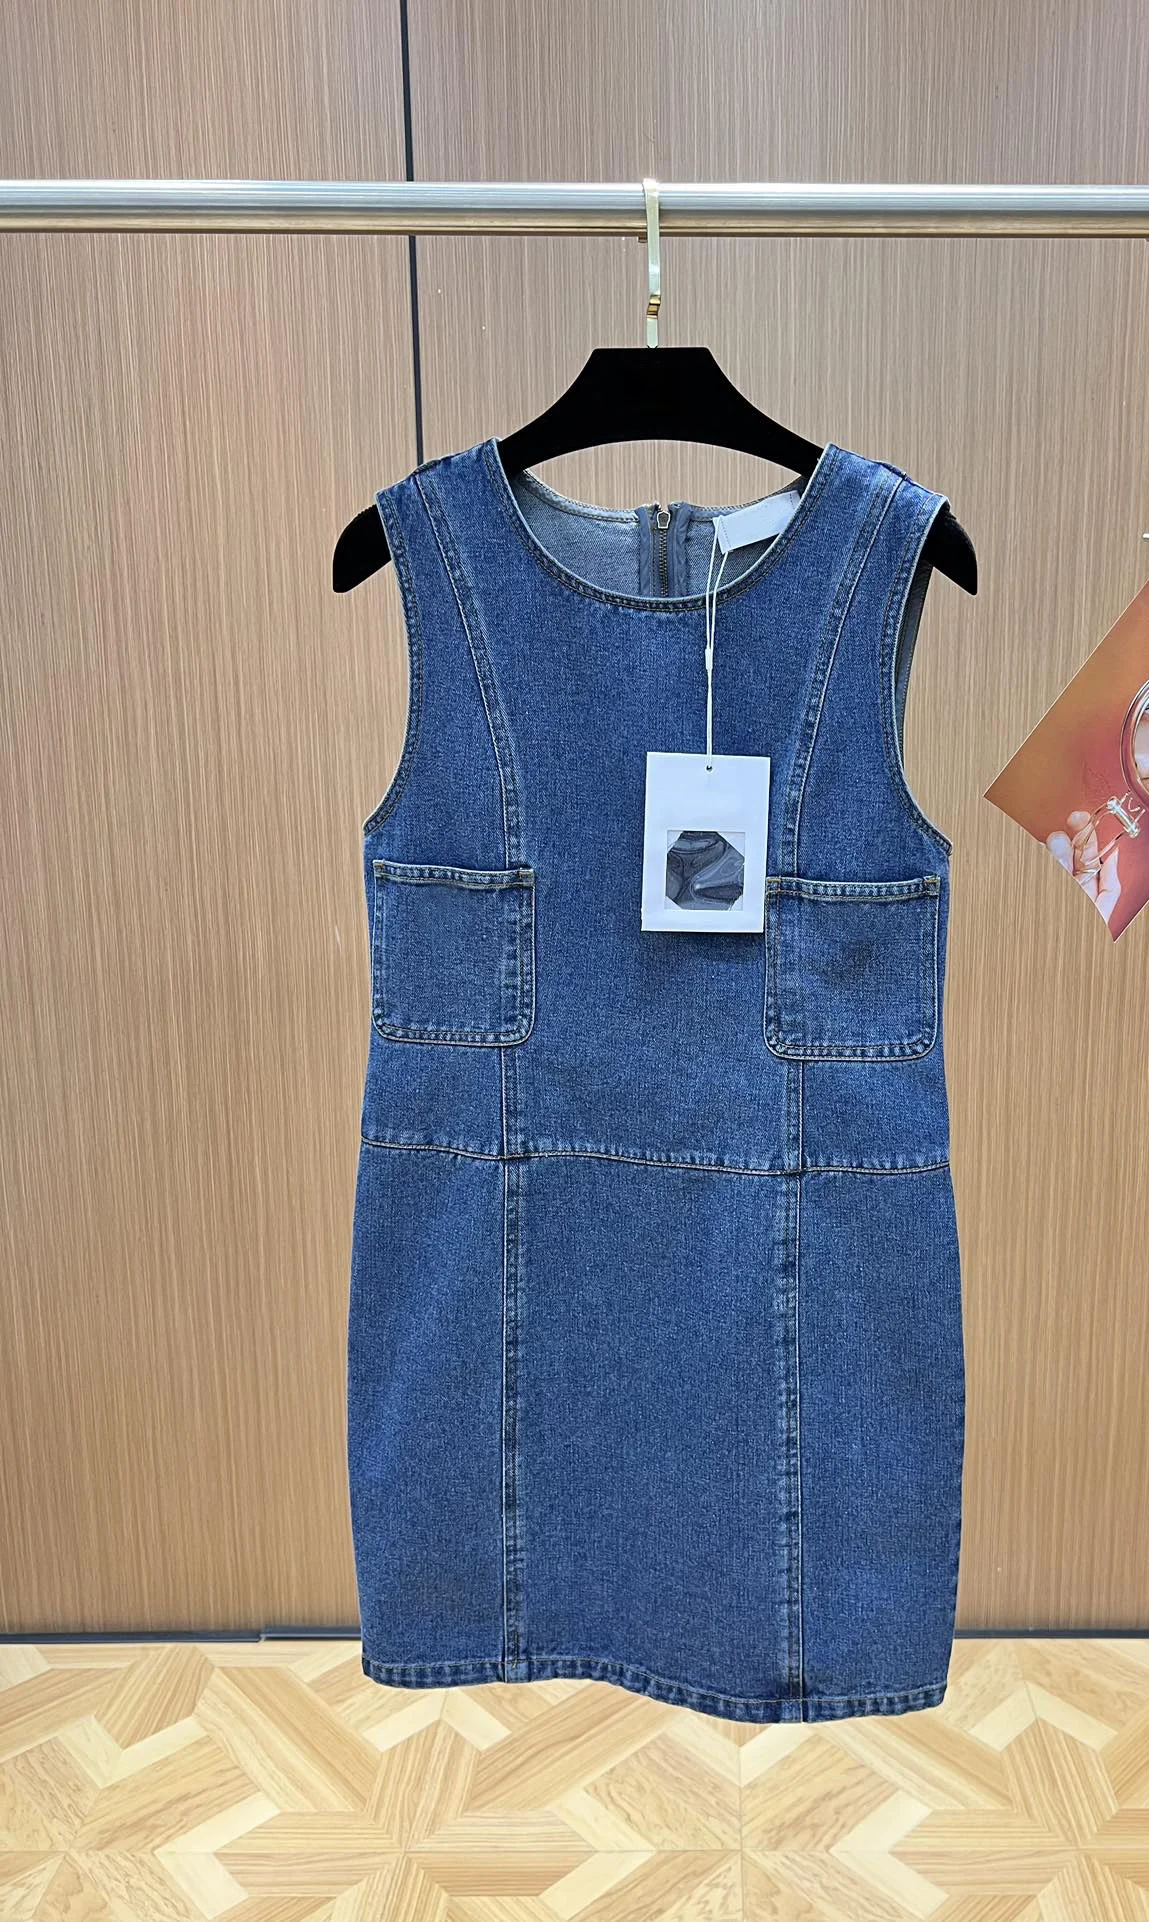 The Summer 2023 classic blue denim sleeveless dress features a simple design paired with colorful floral buttons6.27